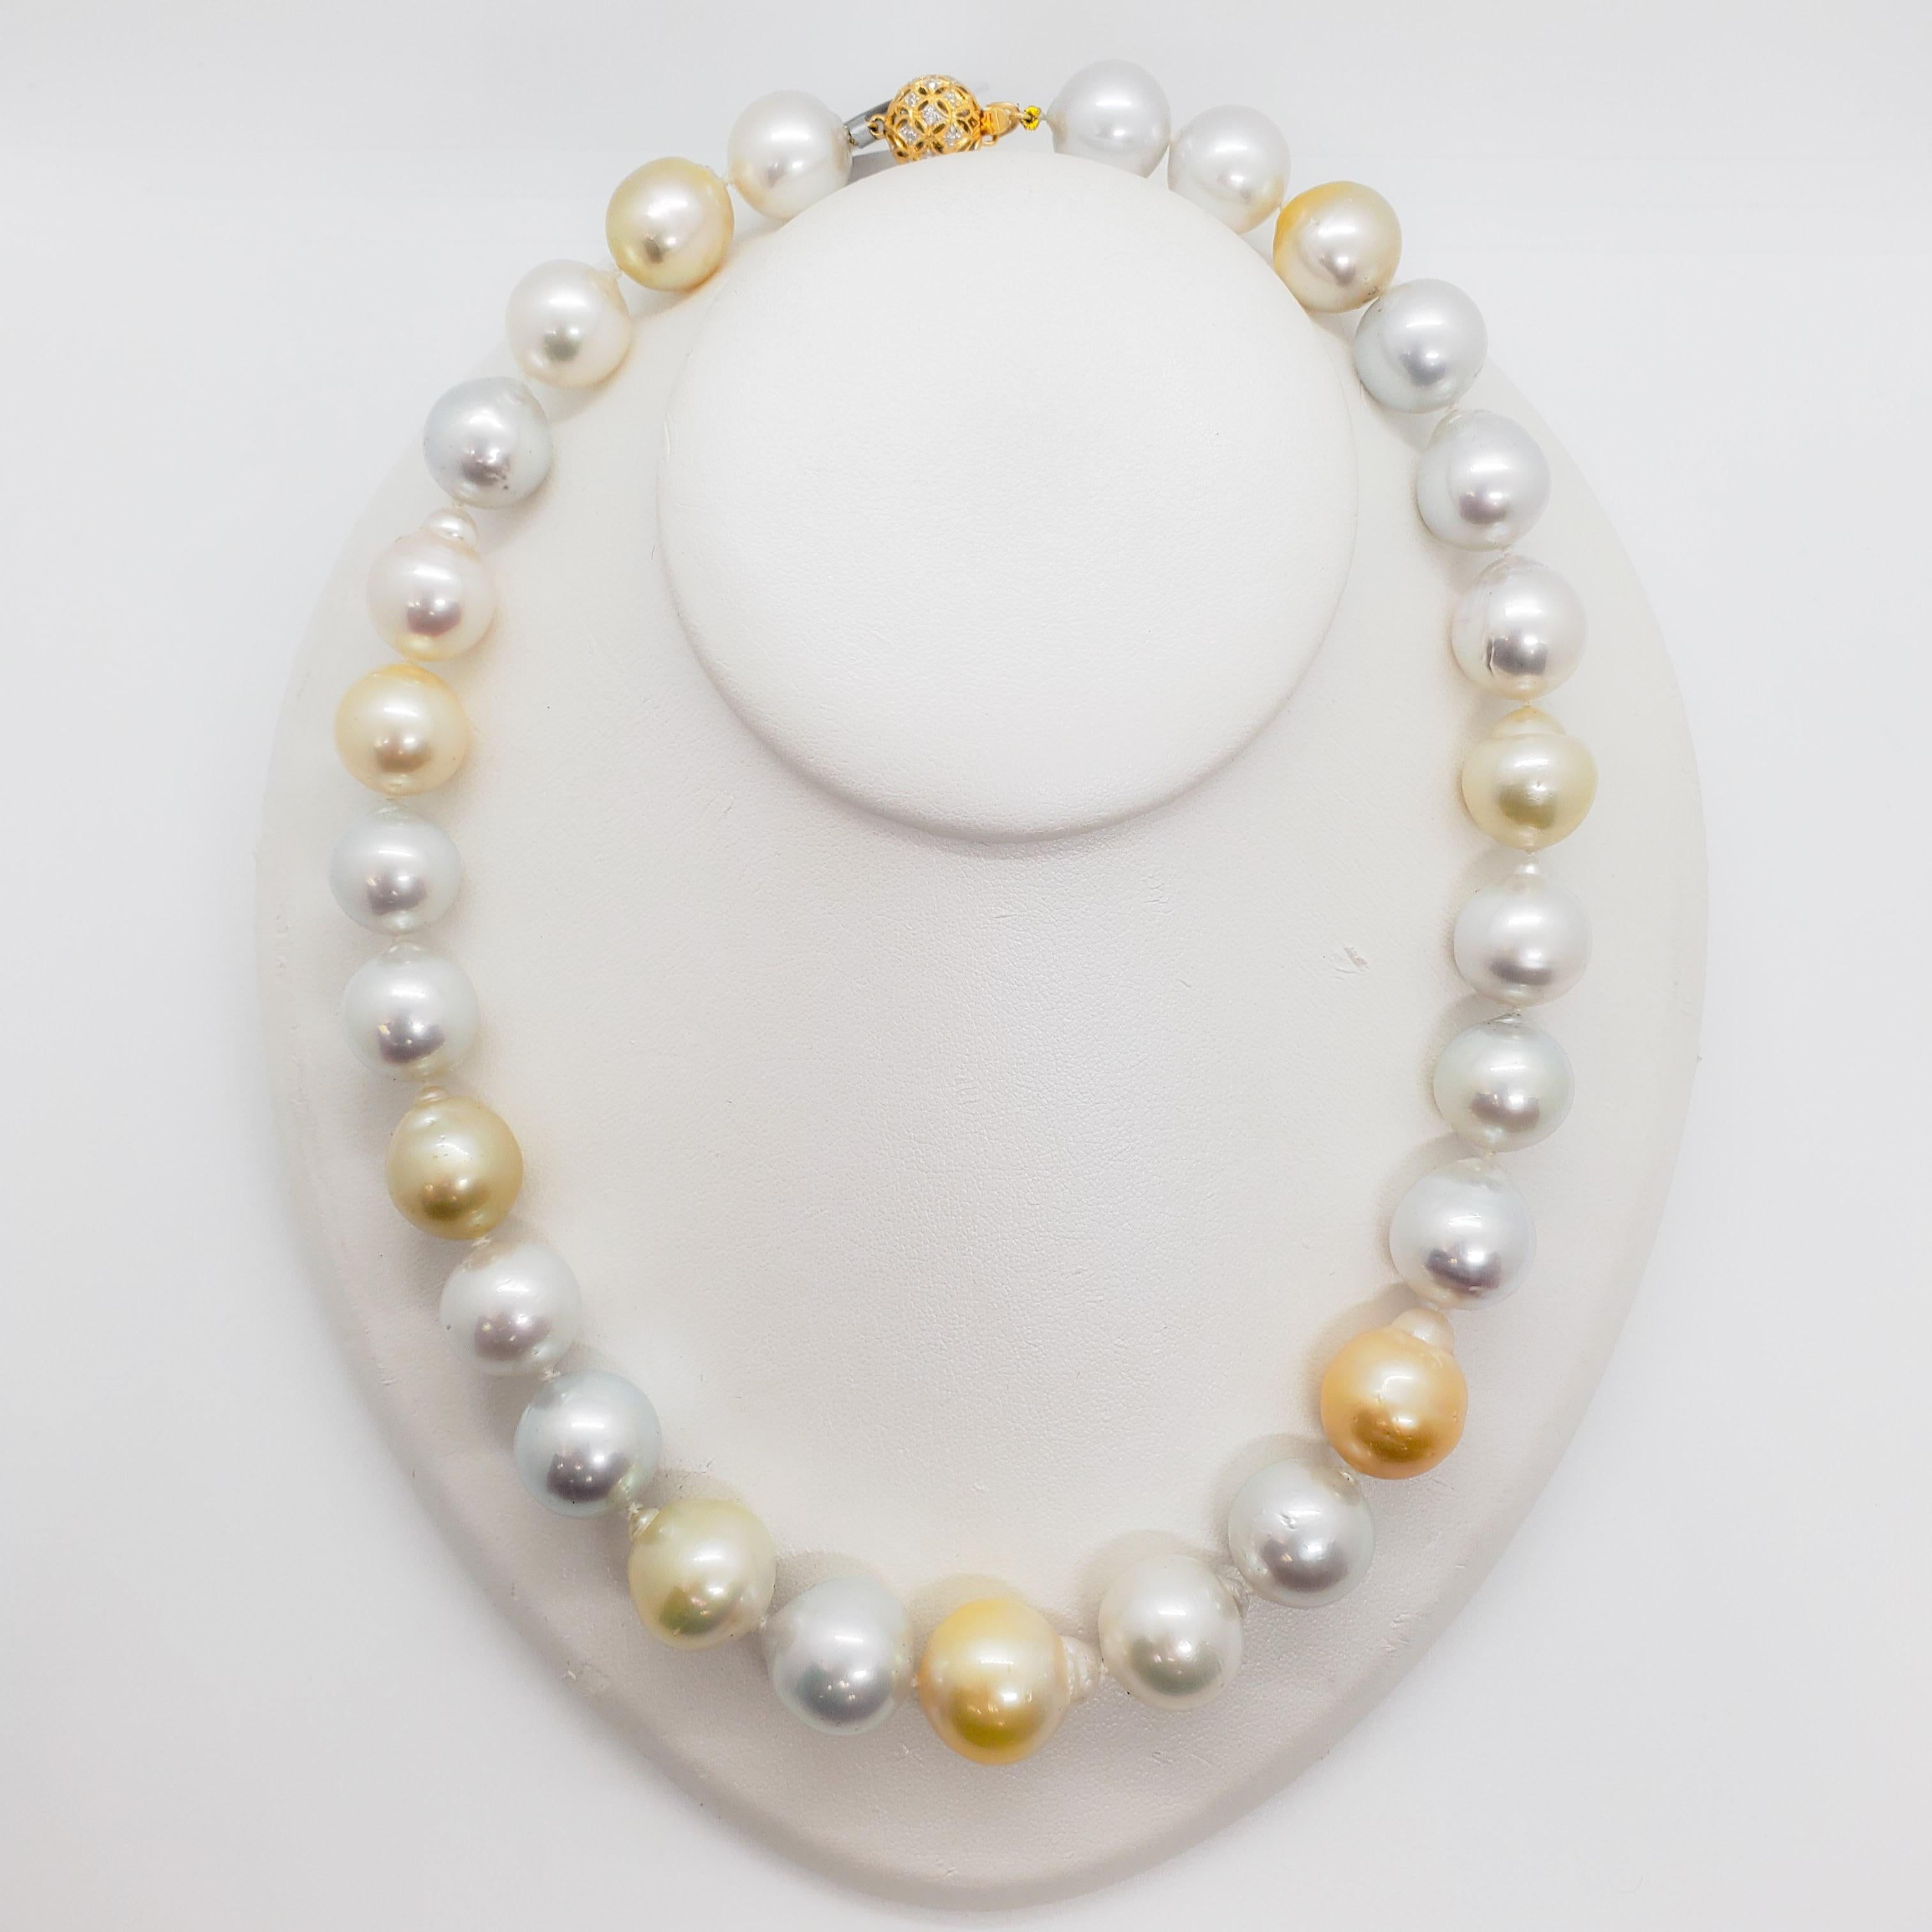  White and Yellow South Sea Pearl Necklace with Diamond Clasp For Sale 5